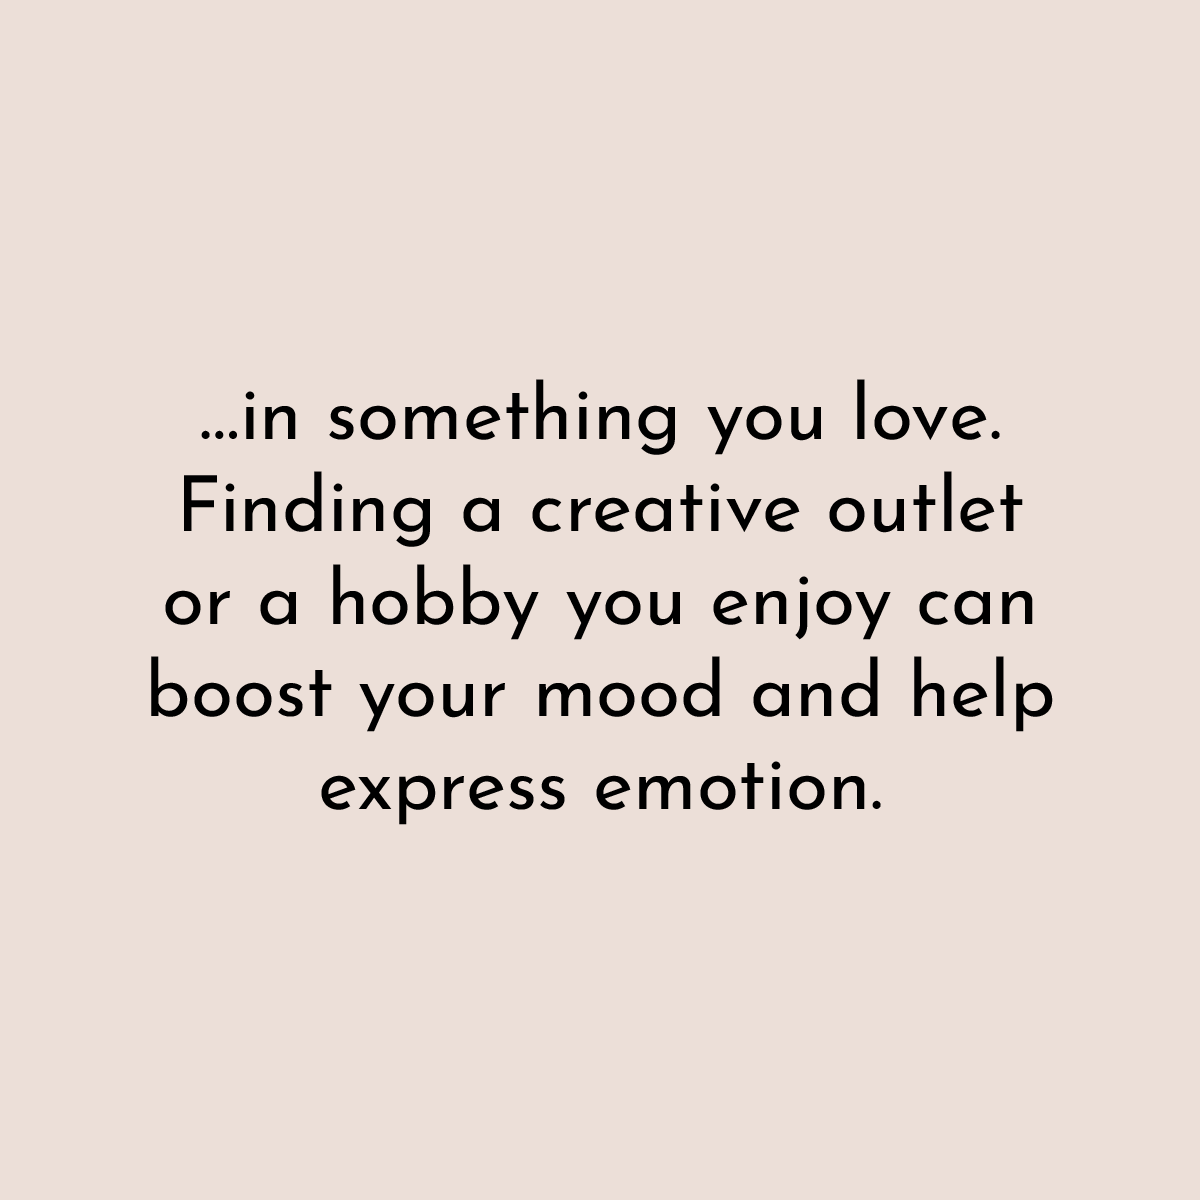 ...in something you love.Finding a creative outlet or a hobby you enjoy can boost your mood and help express emotion.